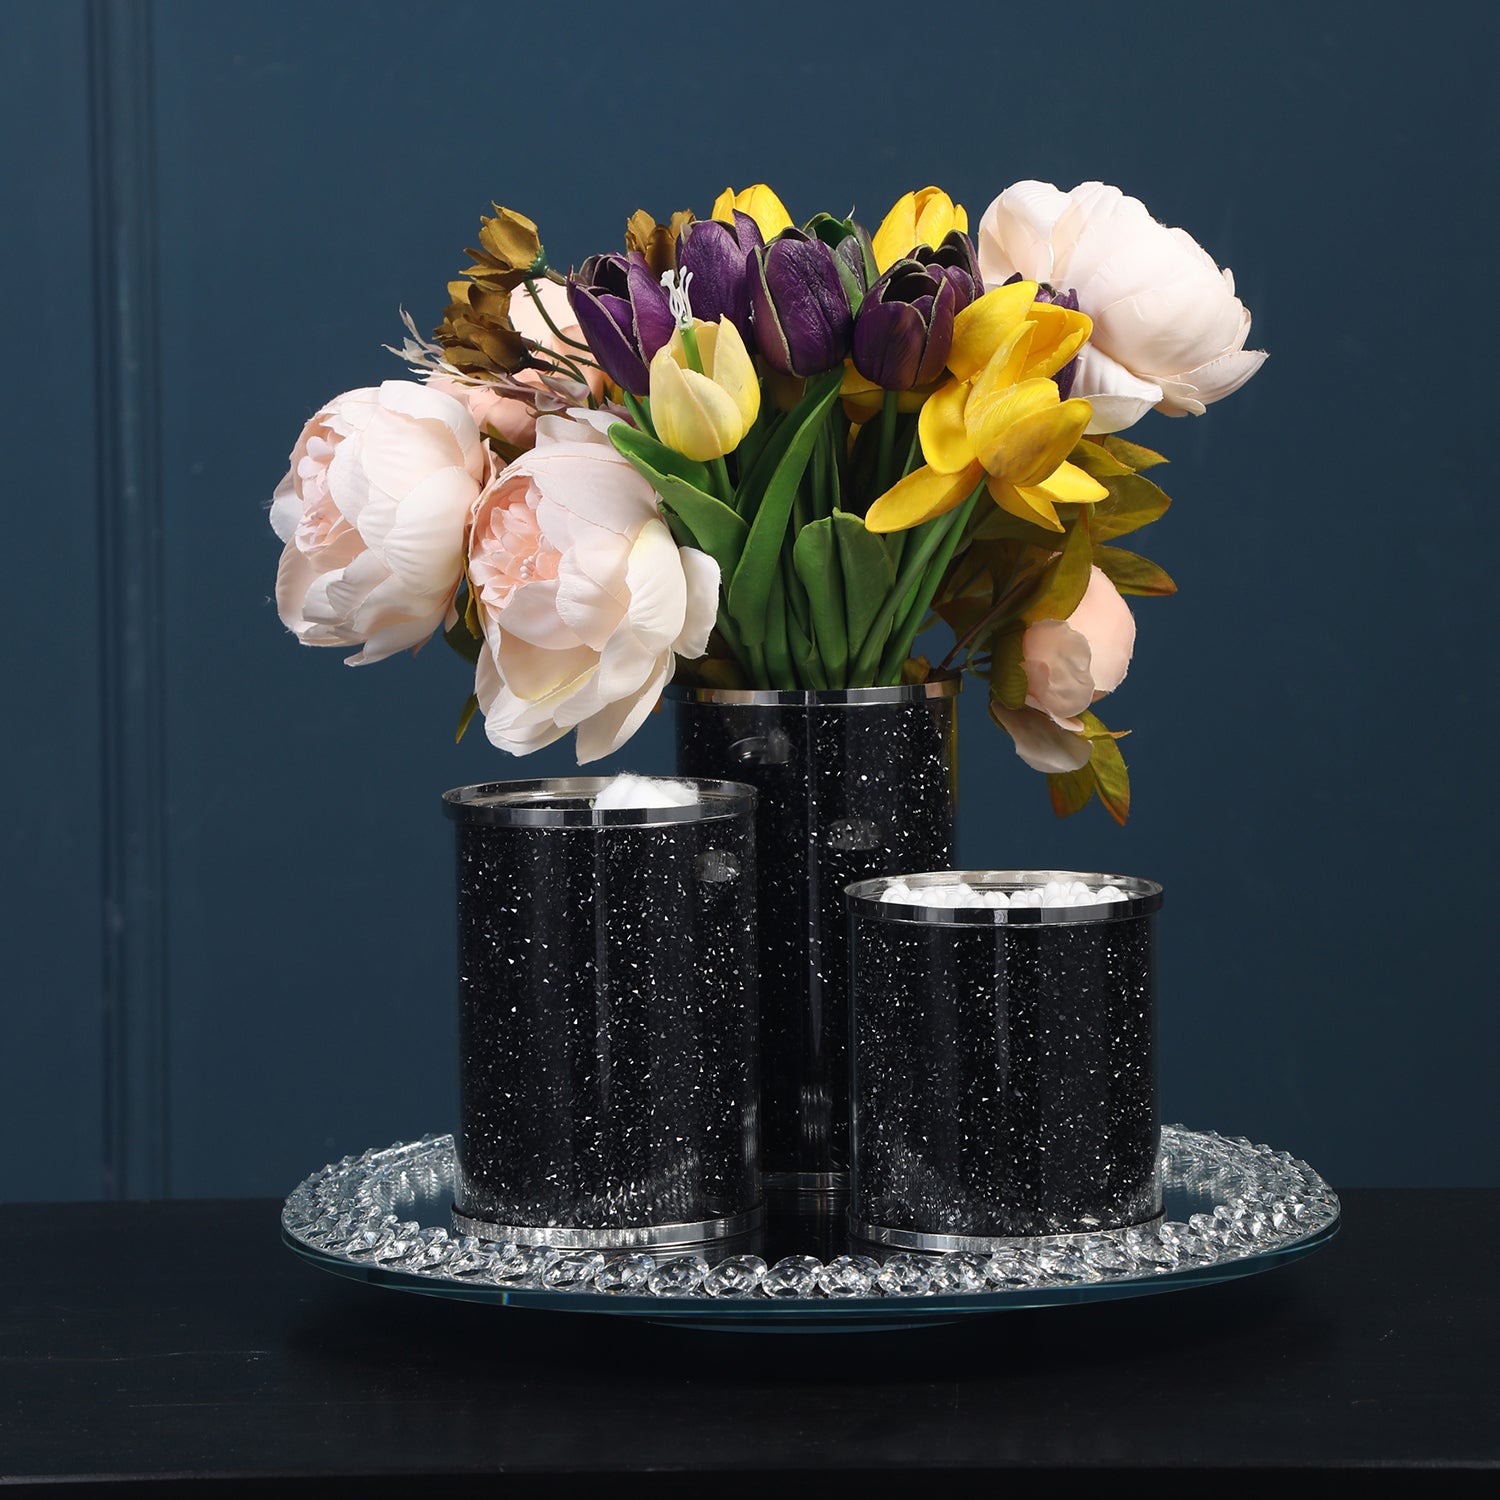 Ambrose Exquisite Three Glass Canister with Tray in black-glass